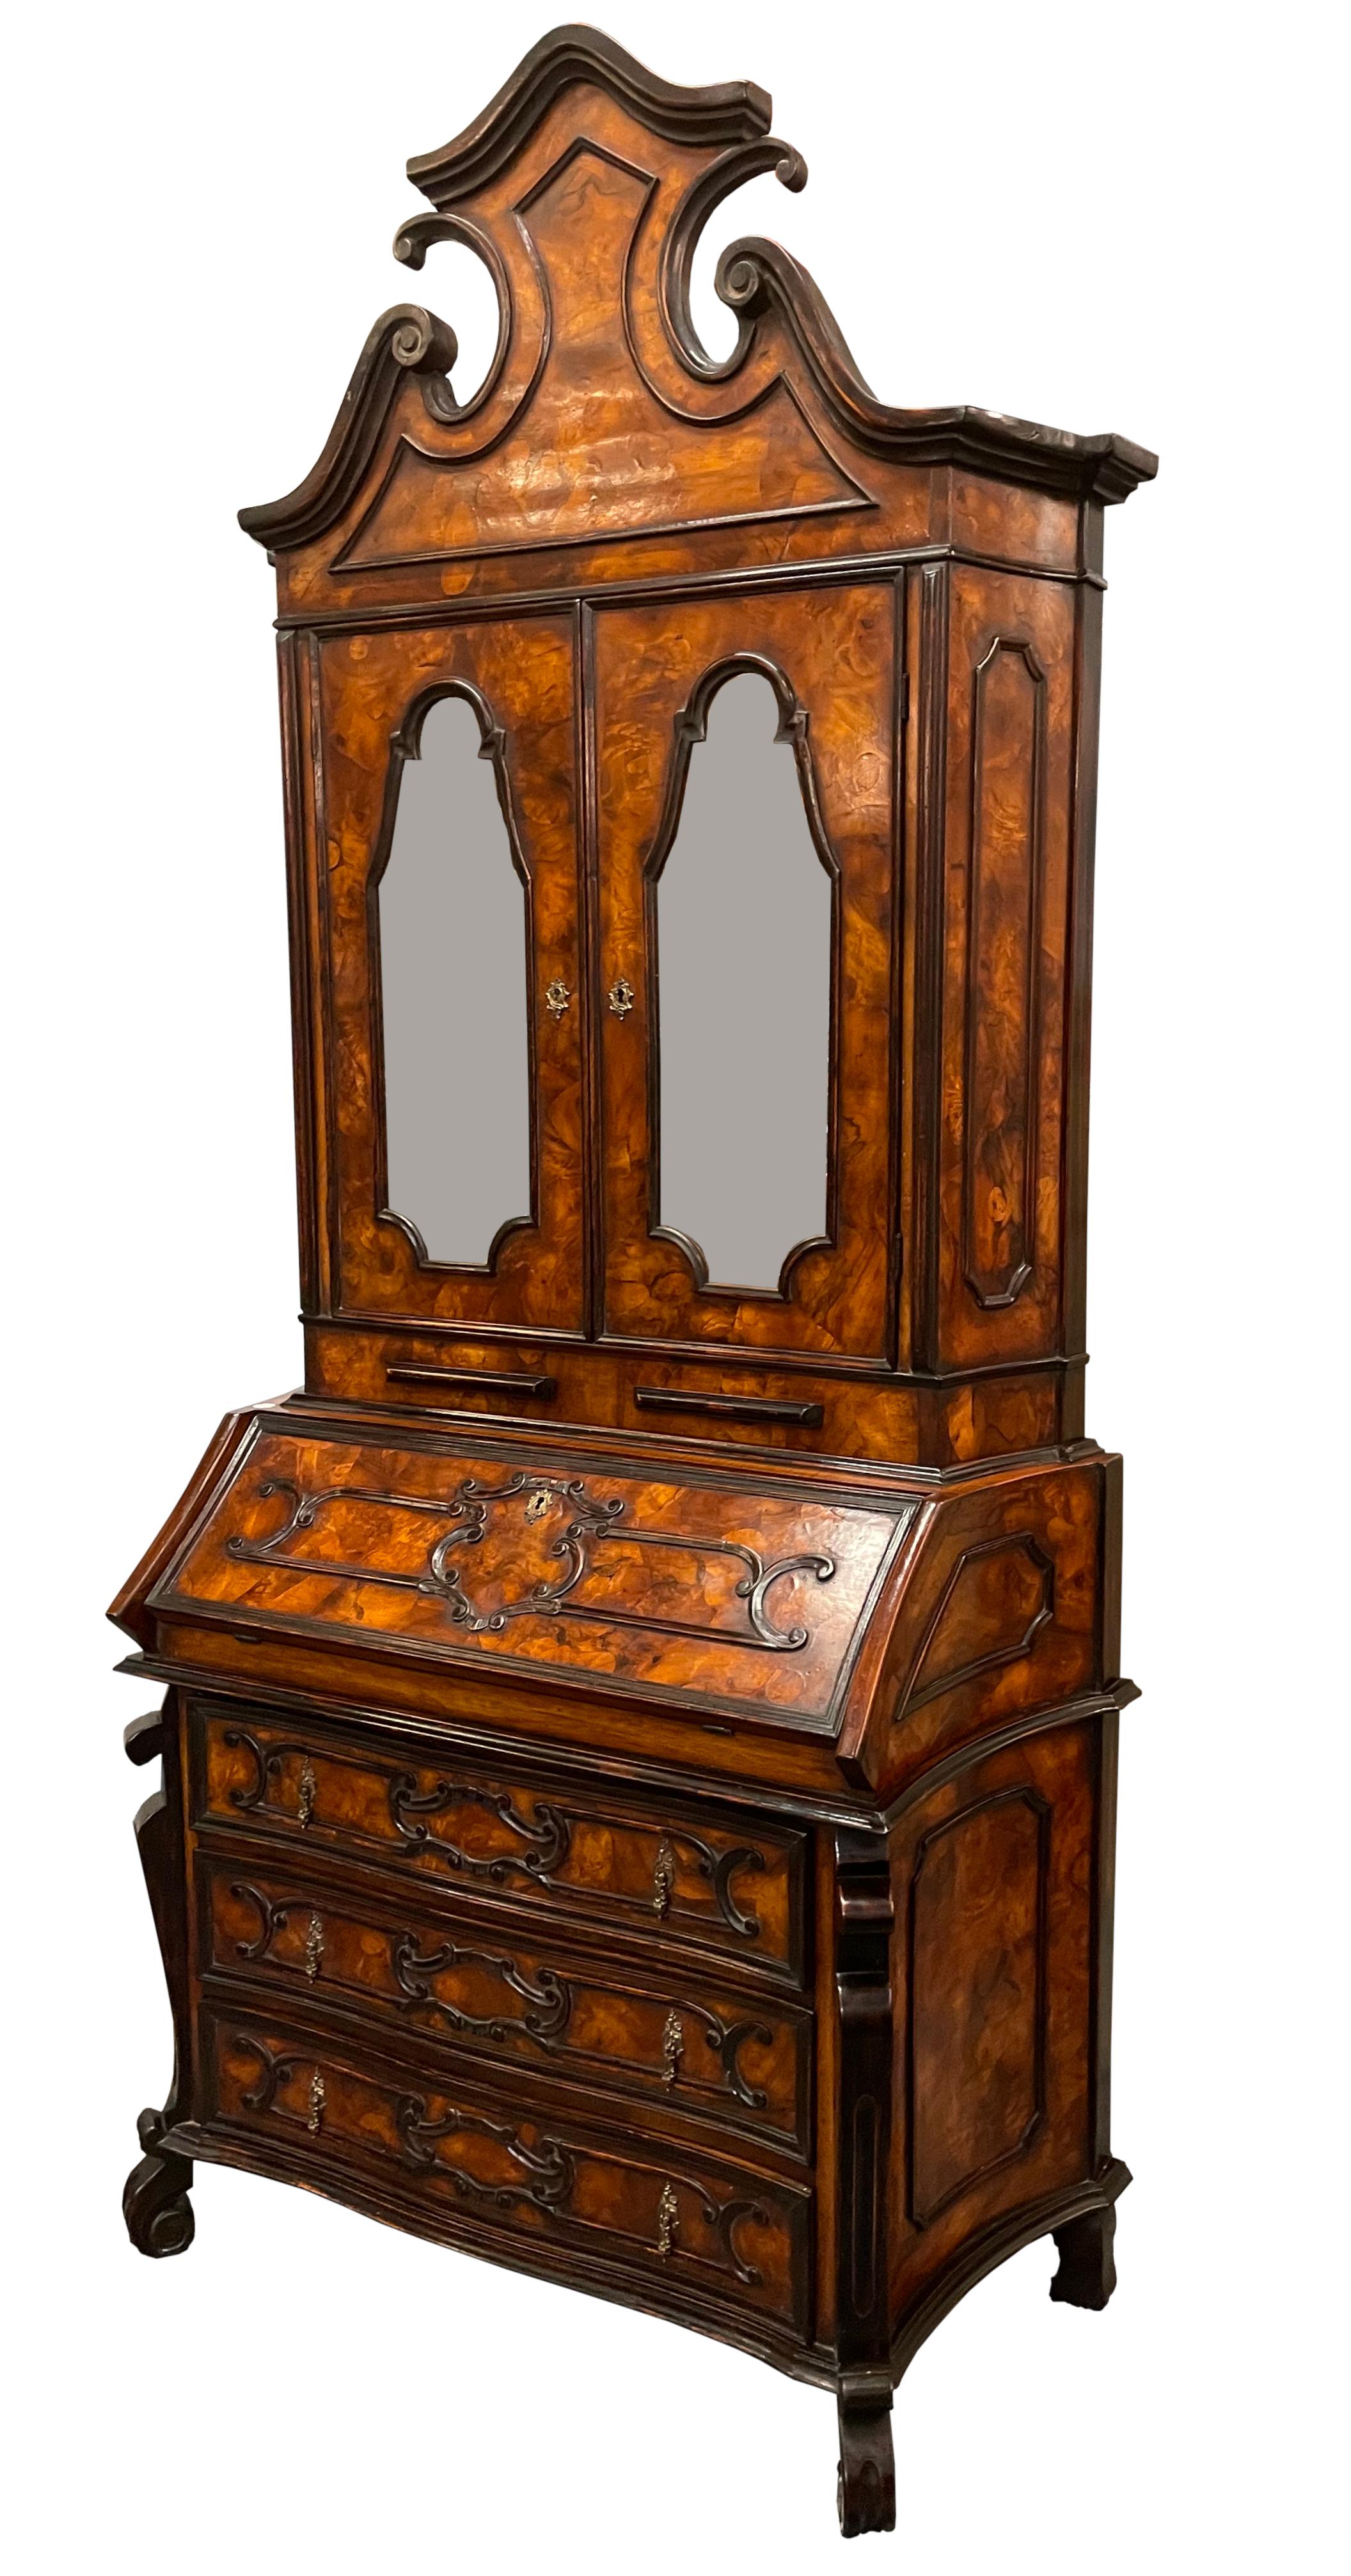 
Venetian Rococo Style Burl Walnut Secretary Bookcase
In two parts, The upper with a molded serpentine cresting incorporating a swans neck cornice, above two mirror-inset shaped doors, opening to shelves, above candle slides, the lower part with a